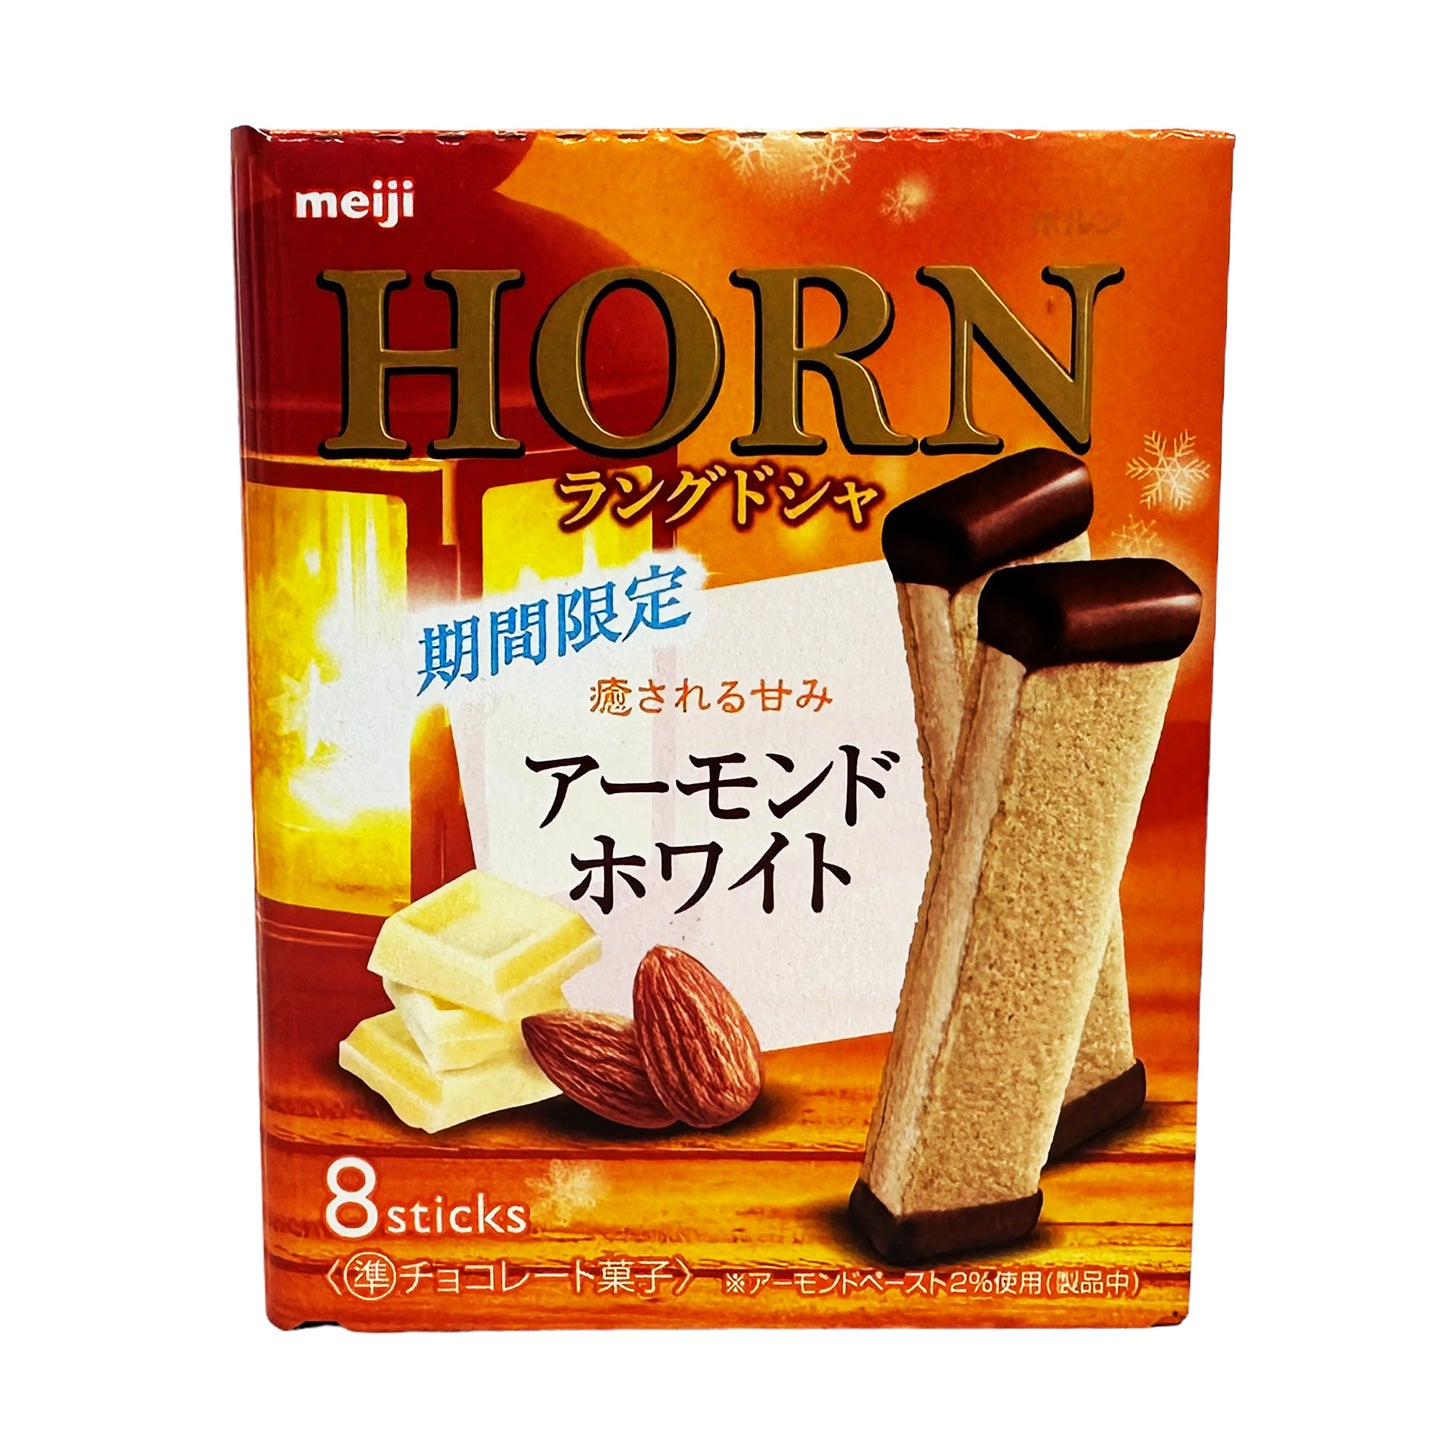 Front graphic image of Meiji Horn Almond White Cookies 1.86oz (53g)